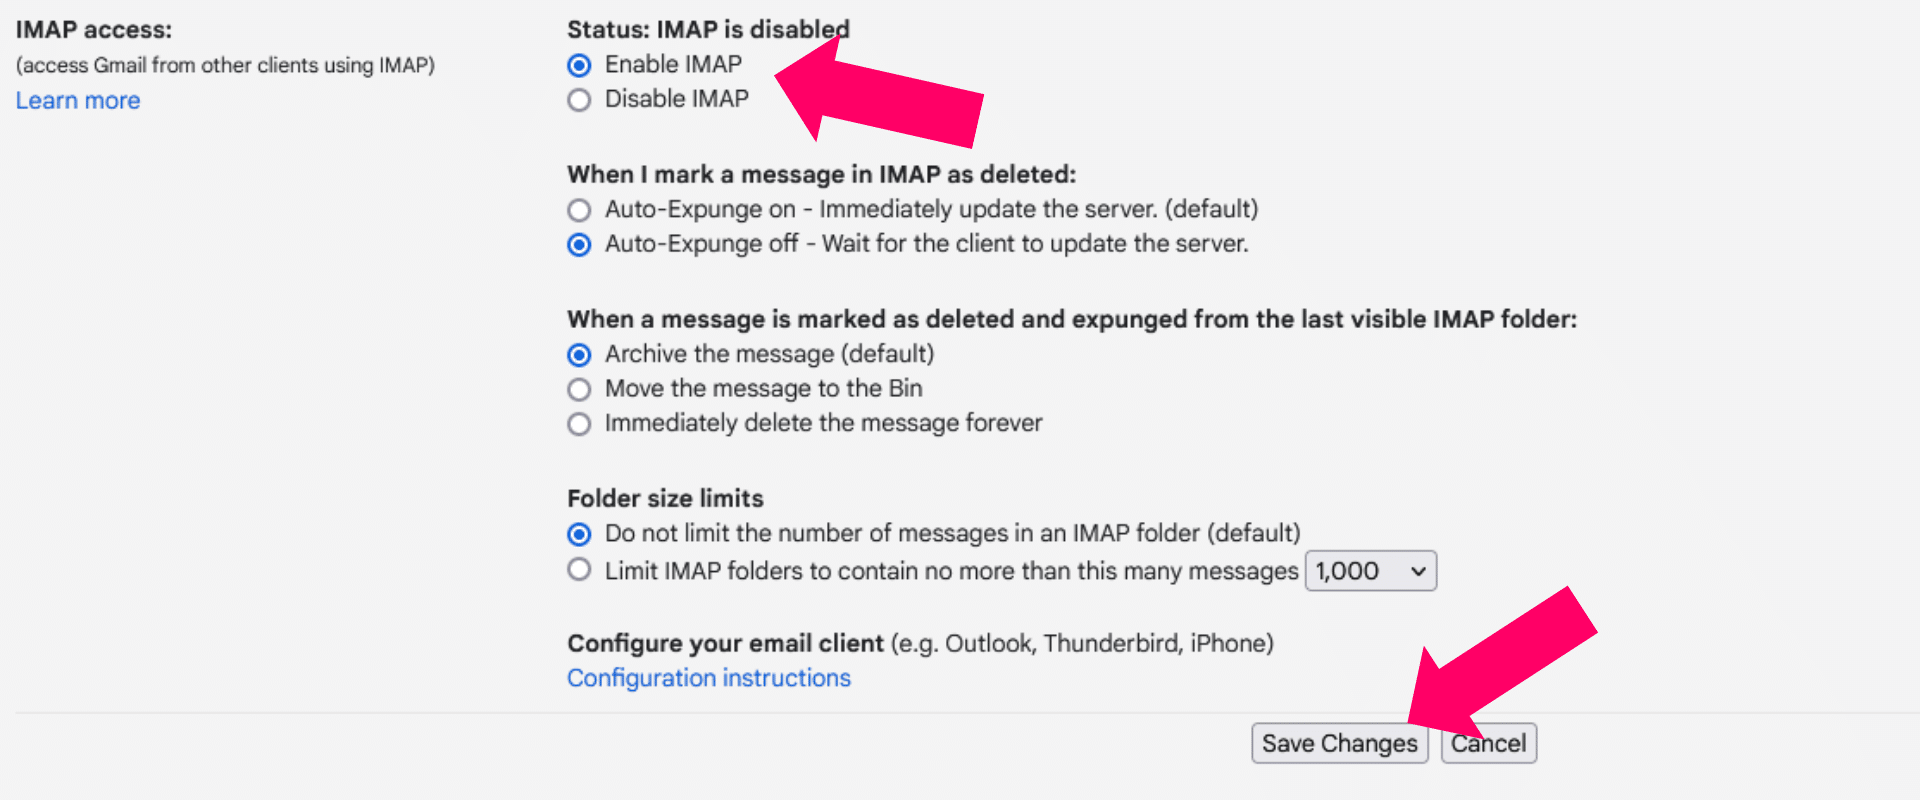 Enable IMAP: Find 'IMAP Access' and click on 'Enable'. Do not change any other settings.<br />
Save Changes: Scroll down and click on 'Save Changes'.